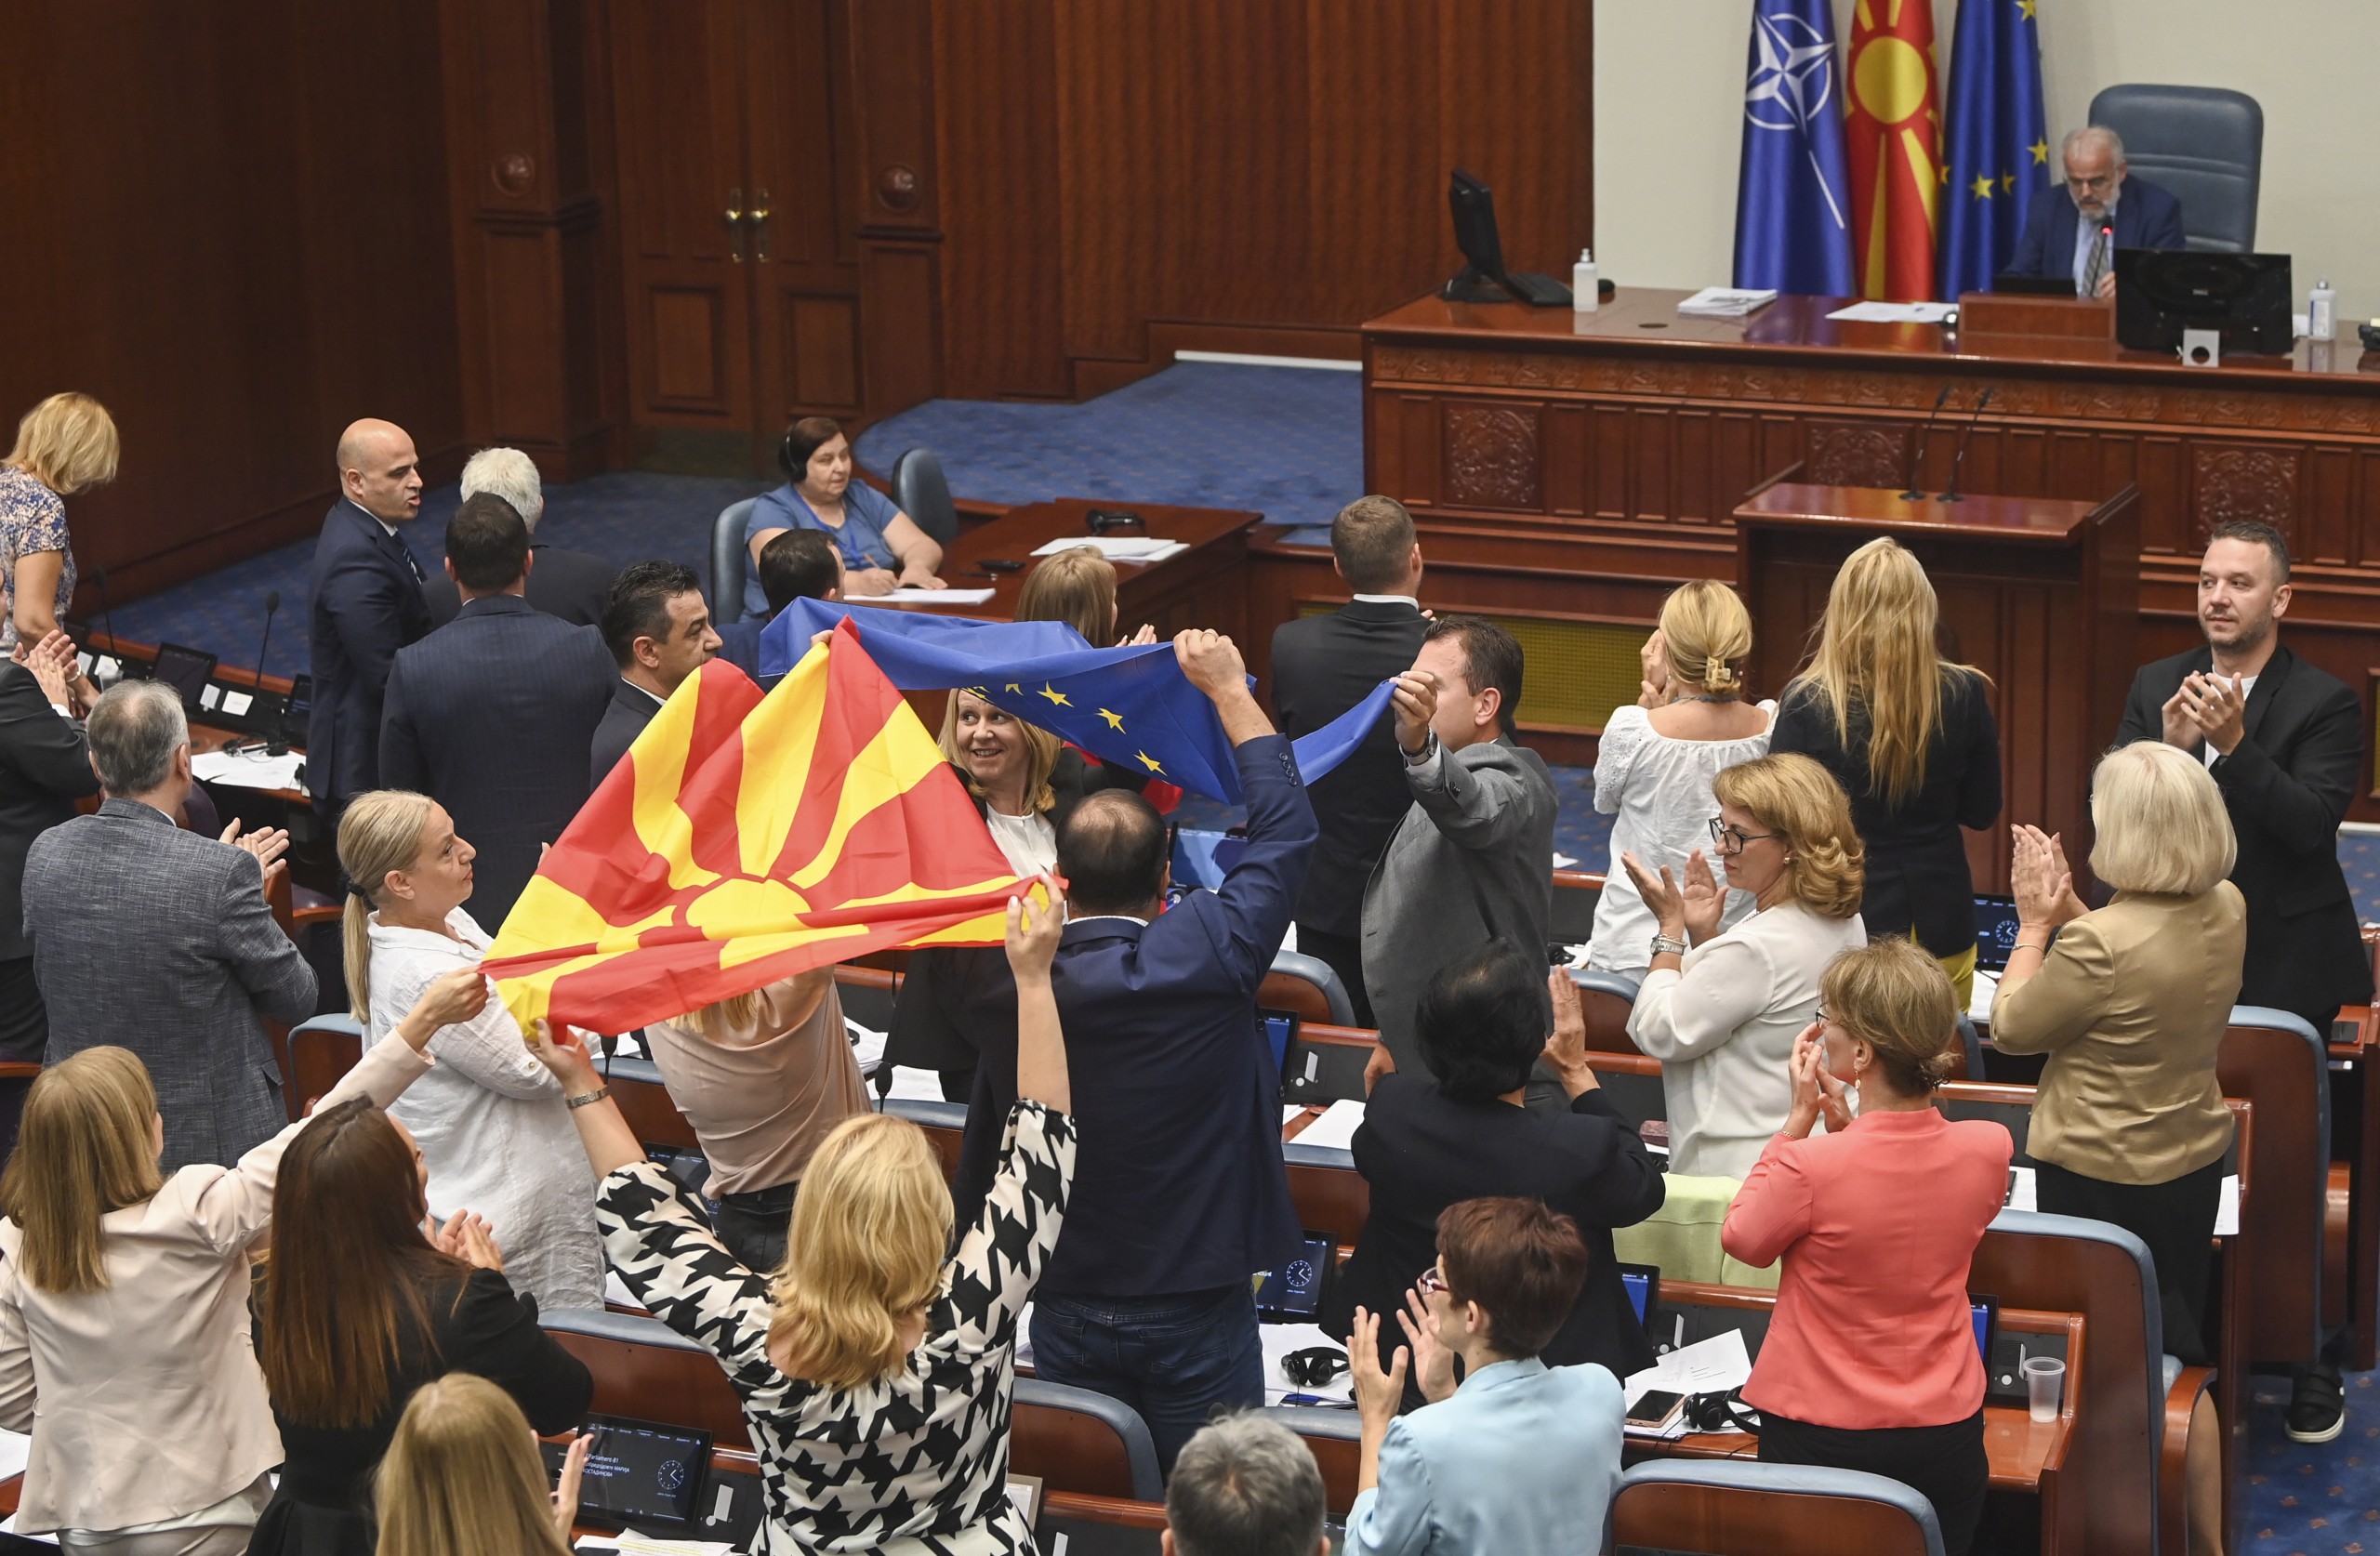 epa10074236 Lawmakers wave Macedonian and EU flags after voting in the Parliament building in Skopje, Republic of North Macedonia, 16 July 2022. The Parliament of North Macedonia voted the conclusions authorizing the Government to accept the EU accession Negotiation Framework proposed by the French Presidency with the Council of EU.  EPA/GEORGI LICOVSKI